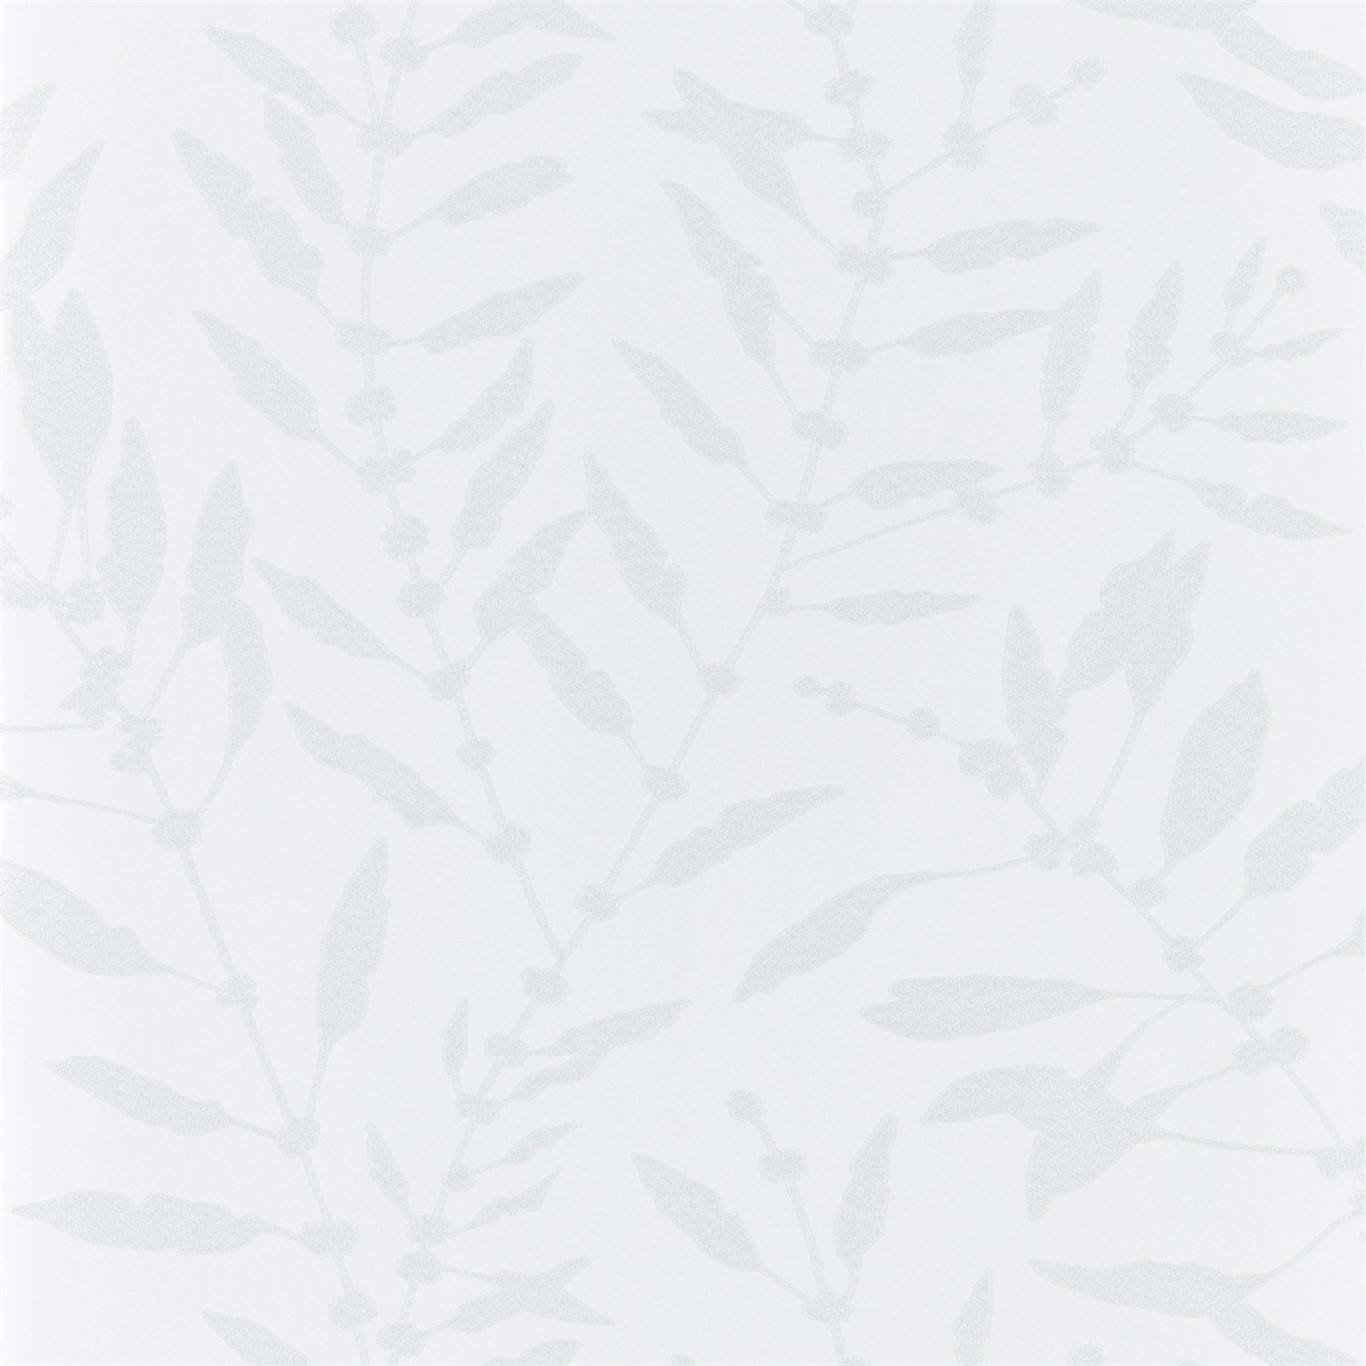 Chaconia Shimmer Pearl Wallpaper by HAR